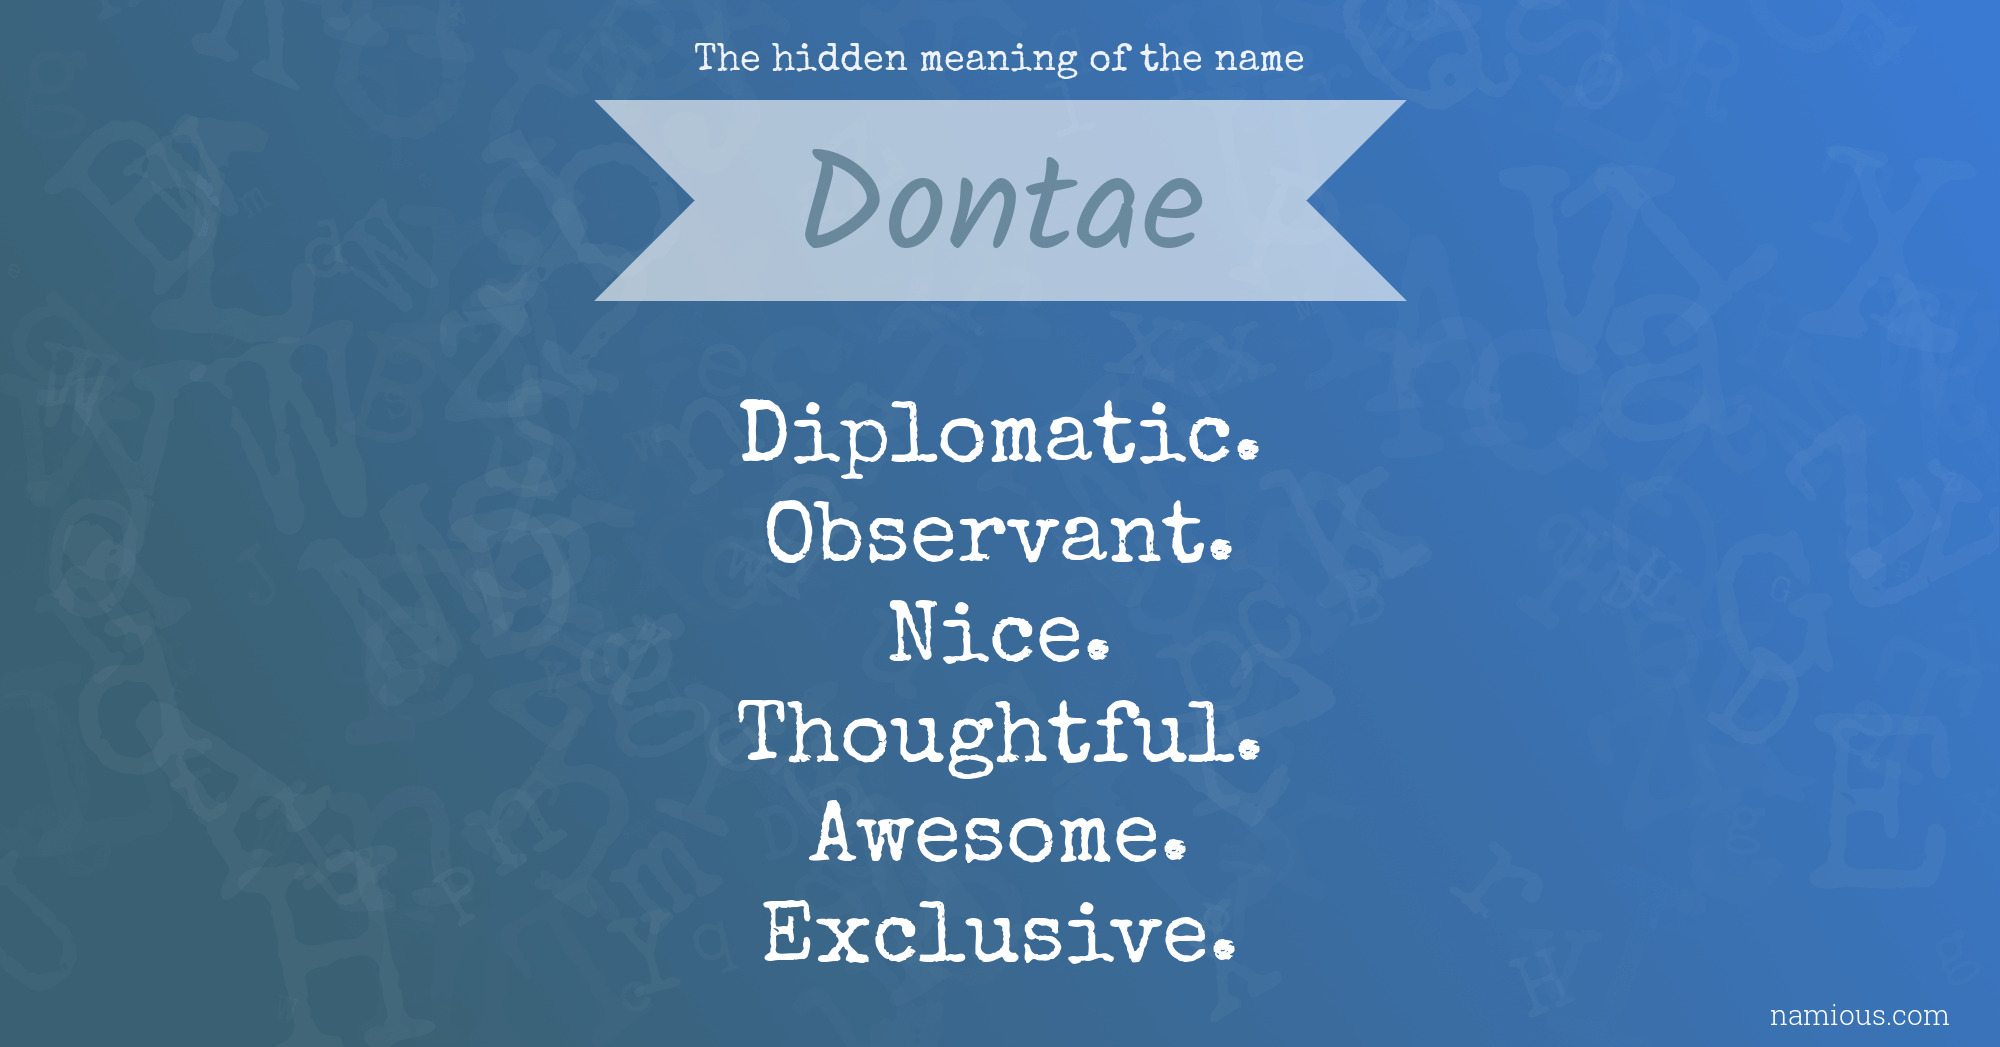 The hidden meaning of the name Dontae